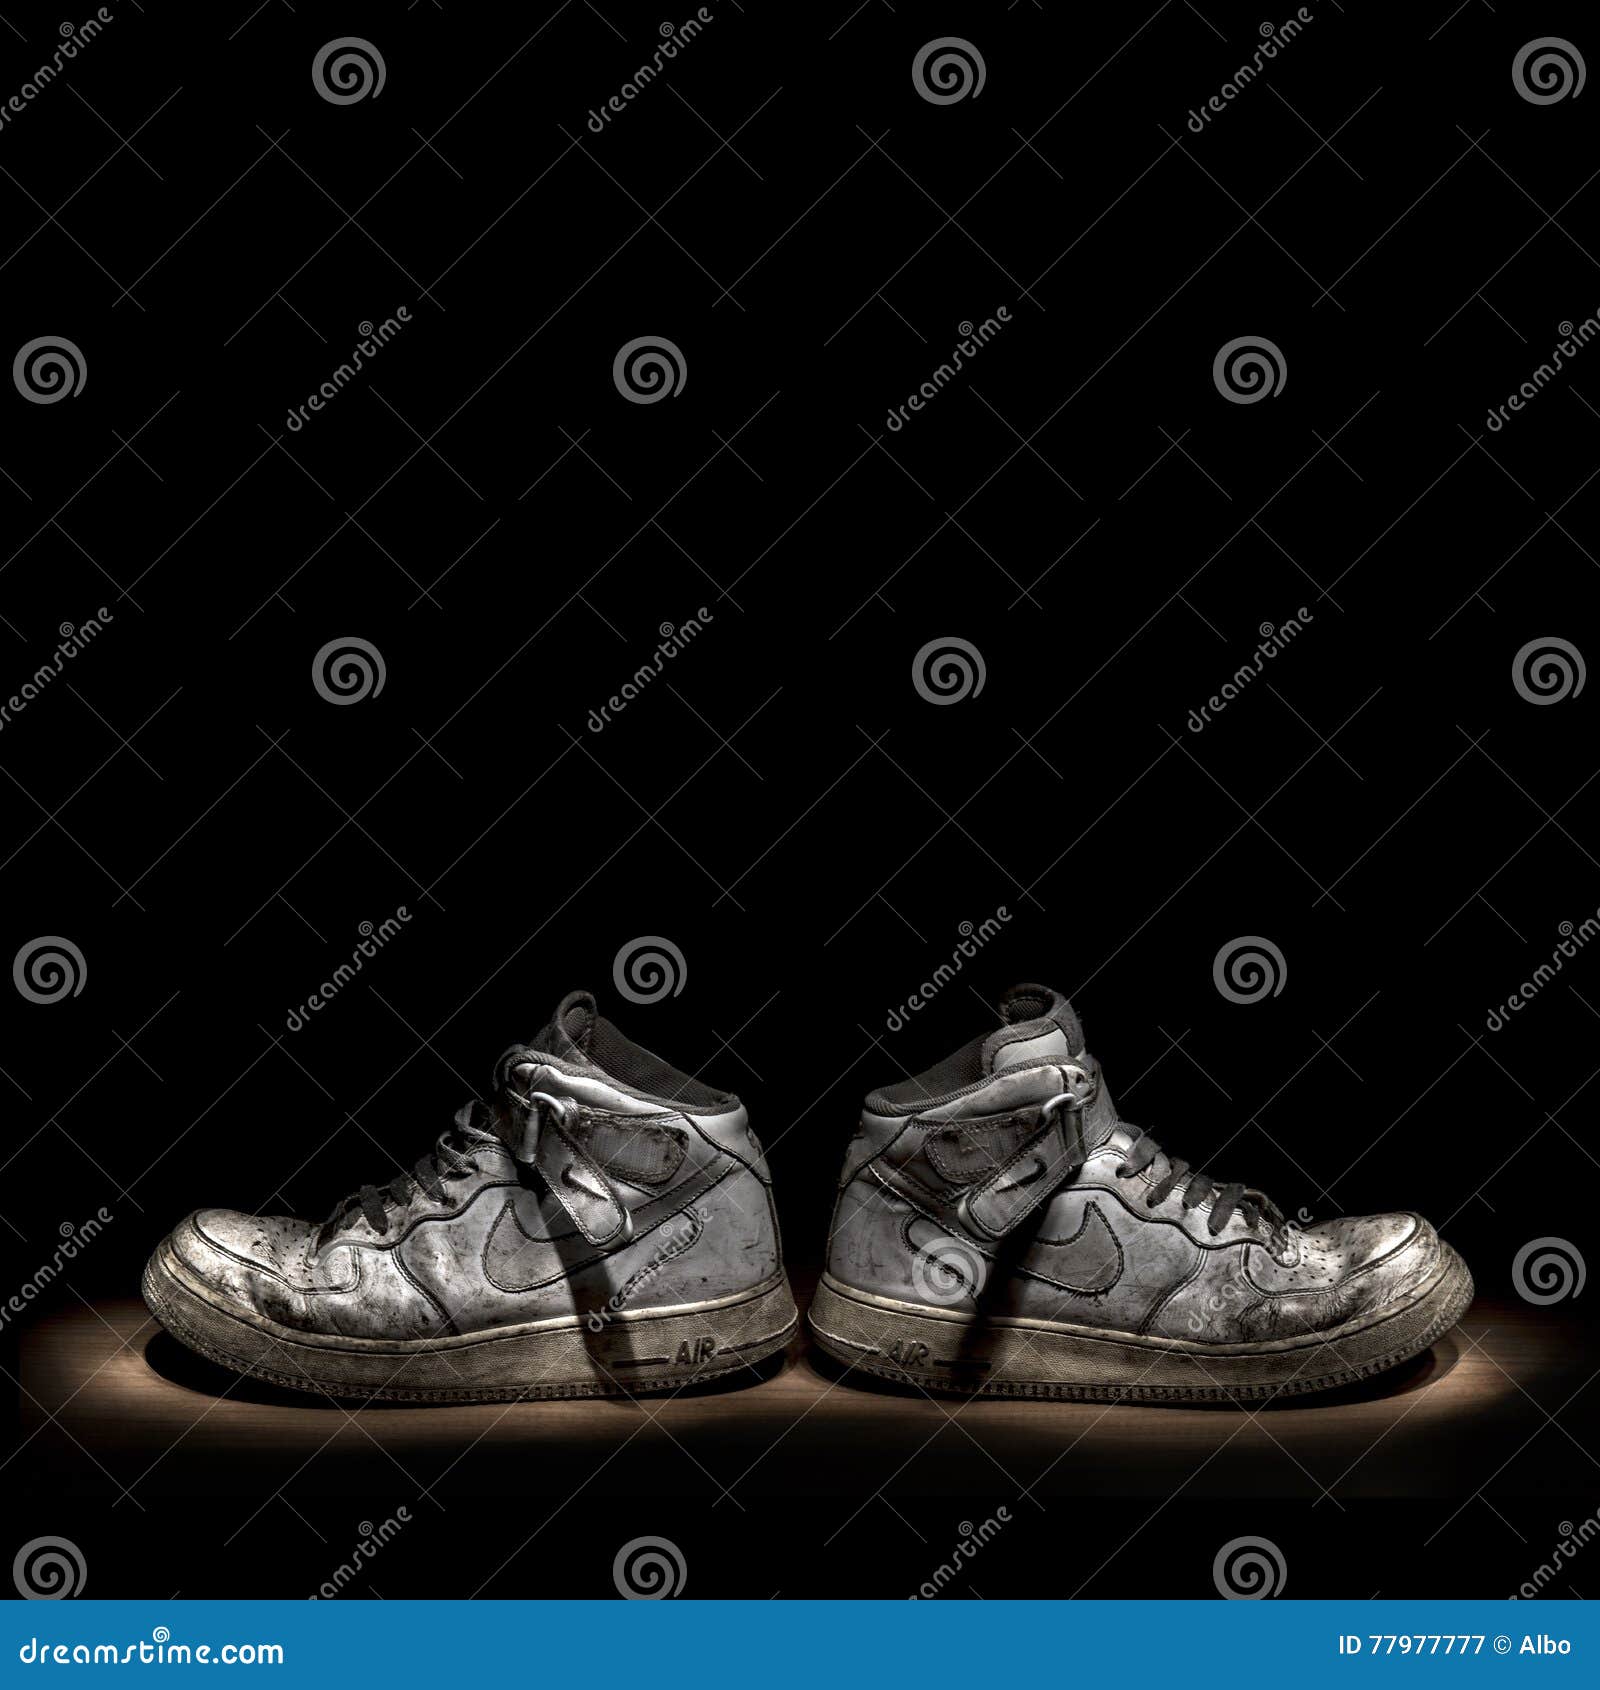 Nike Air Force editorial photography. Image running - 77977777